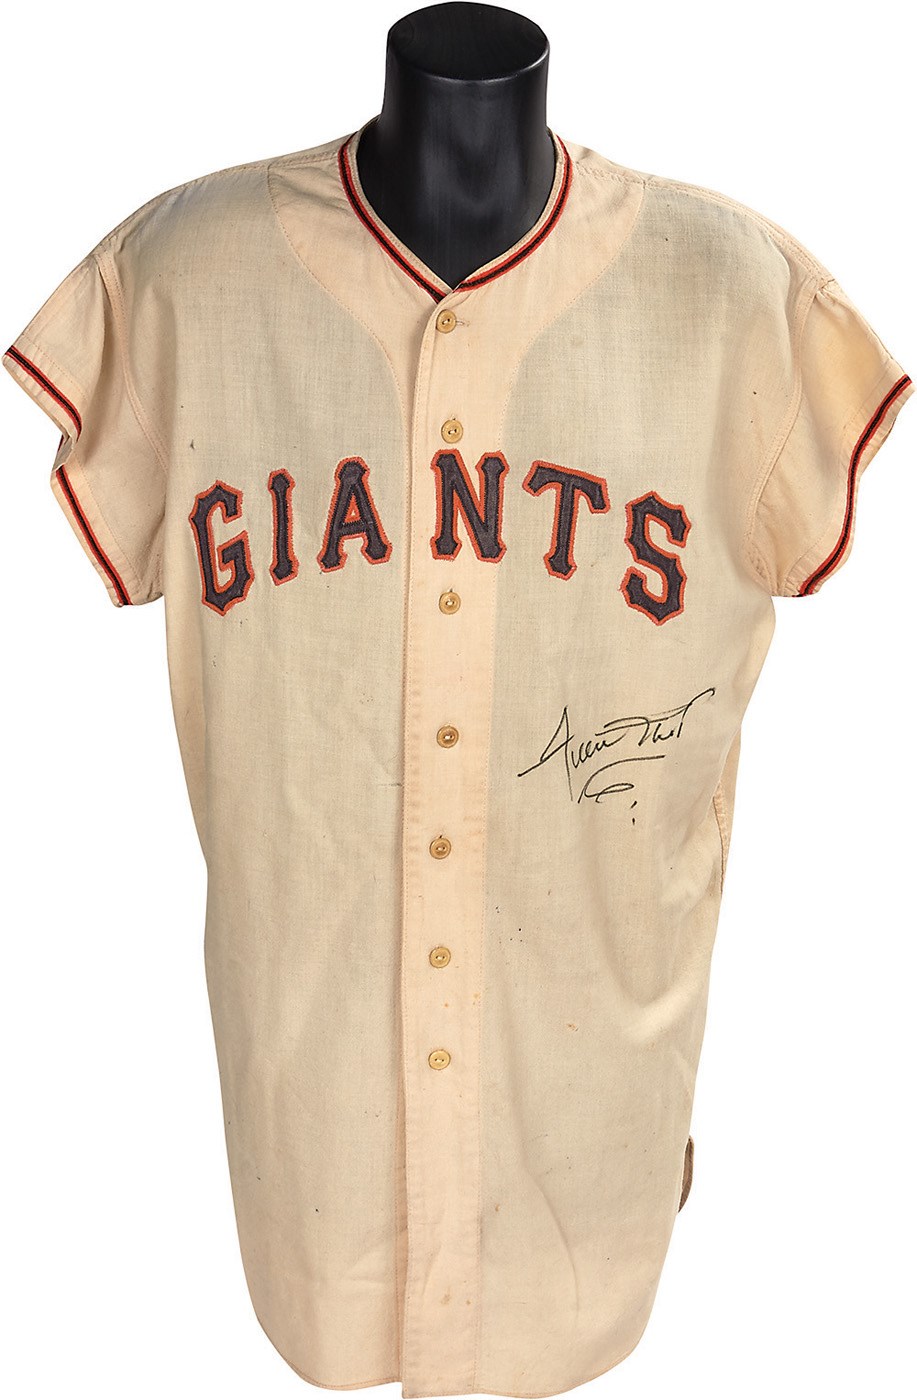 - 1957 Willie Mays New York Giants Game Worn Jersey from His Last Game at the Polo Grounds (MEARS 8)